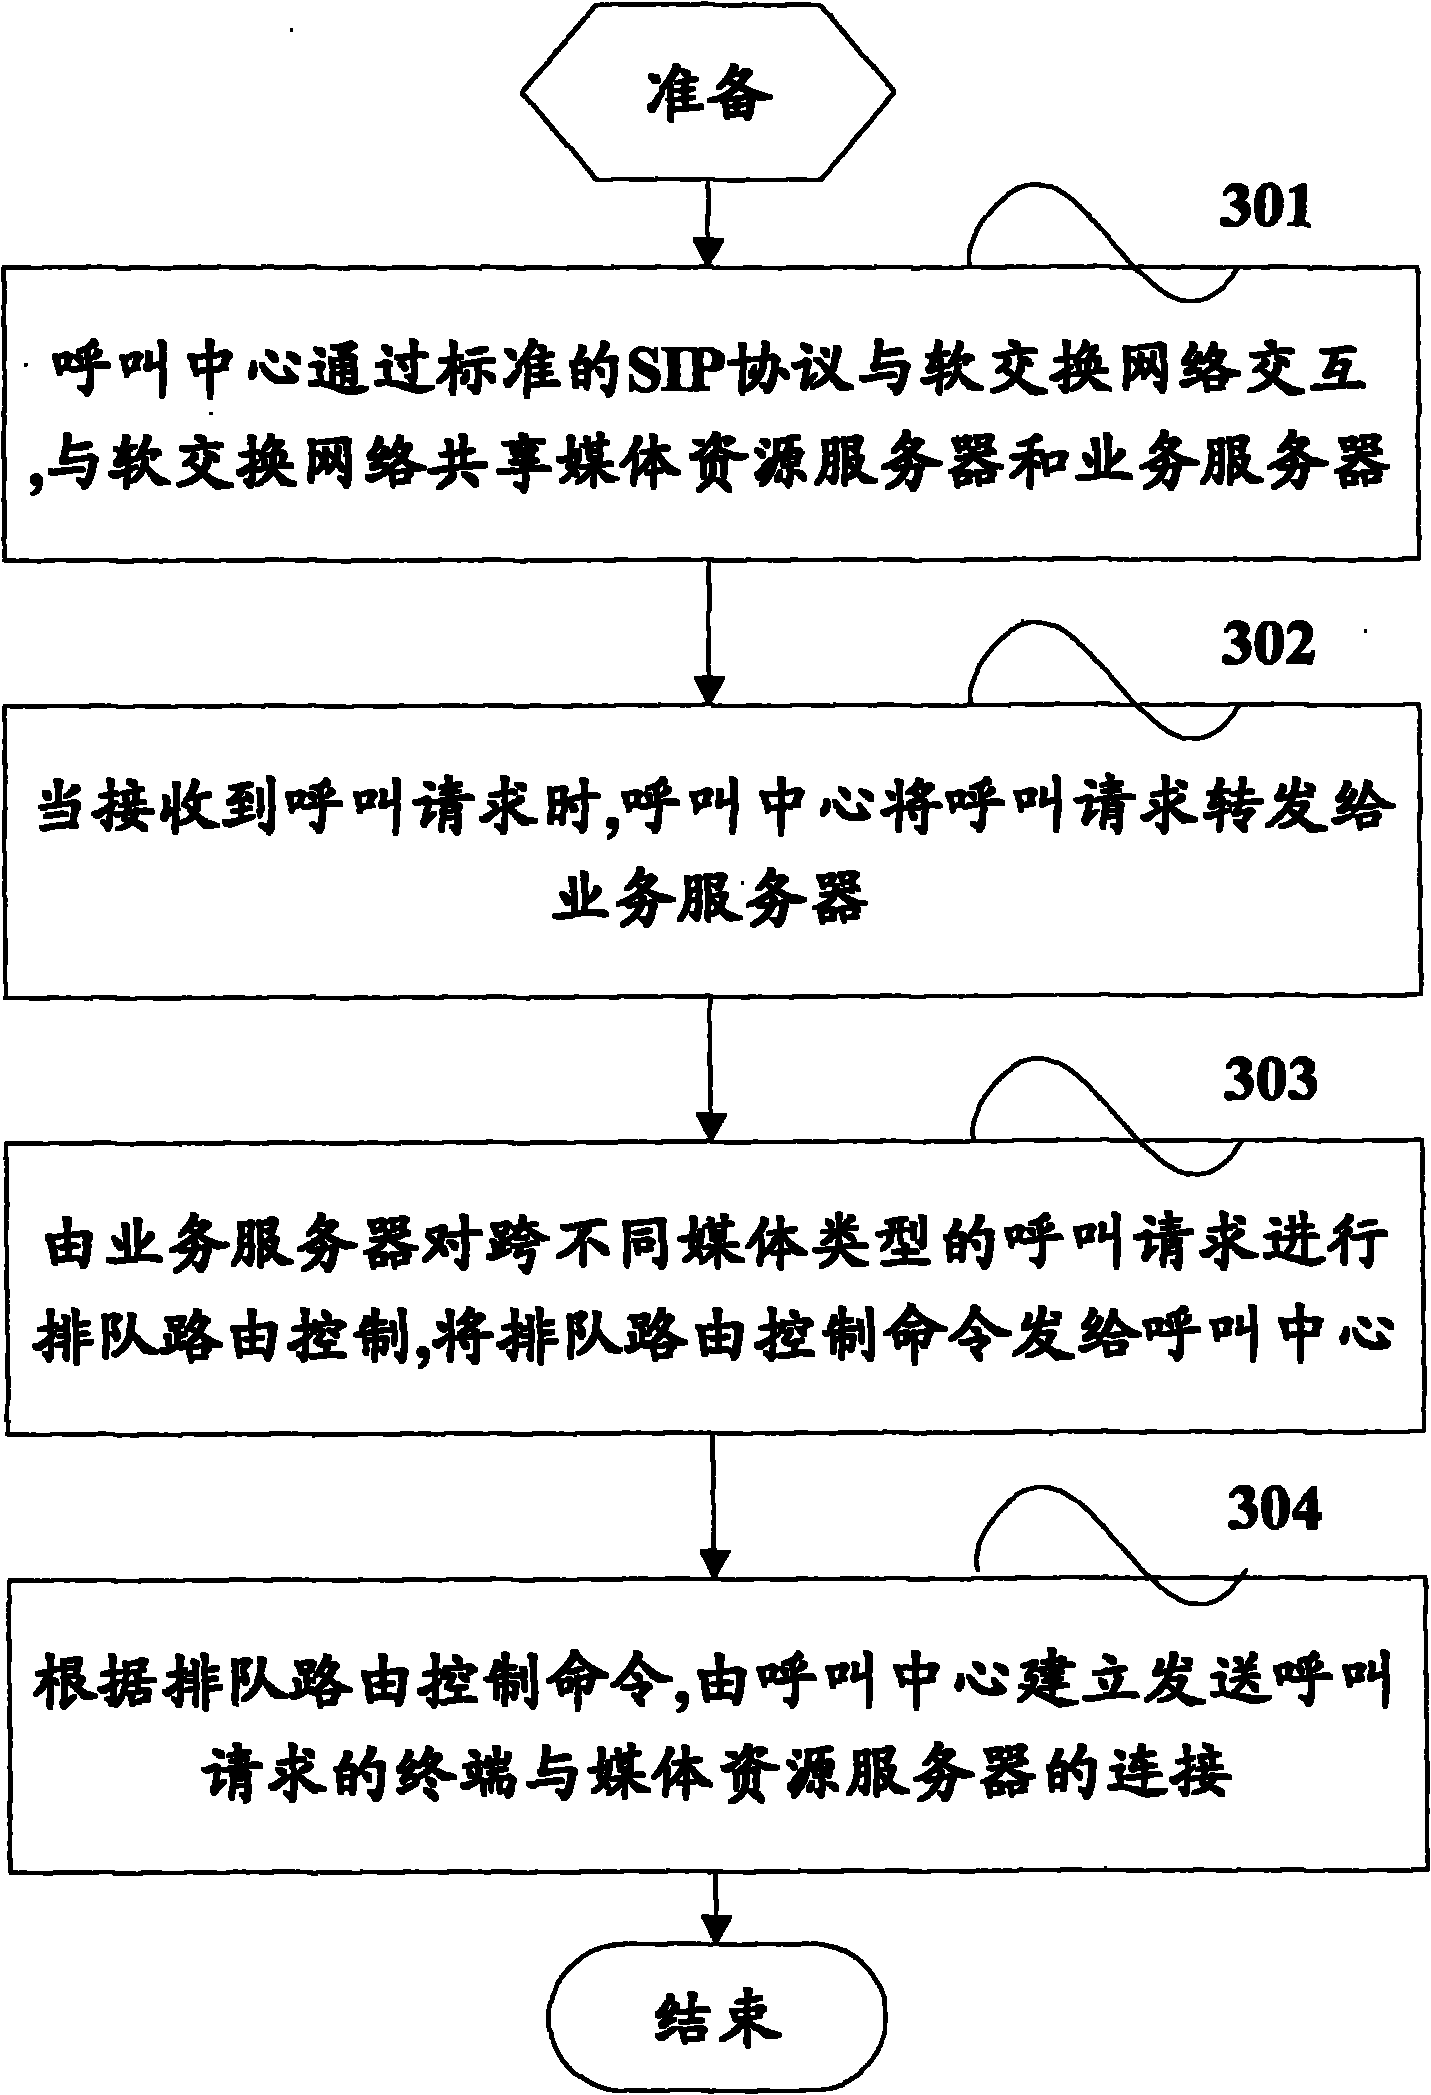 Distributed call center service control method and system